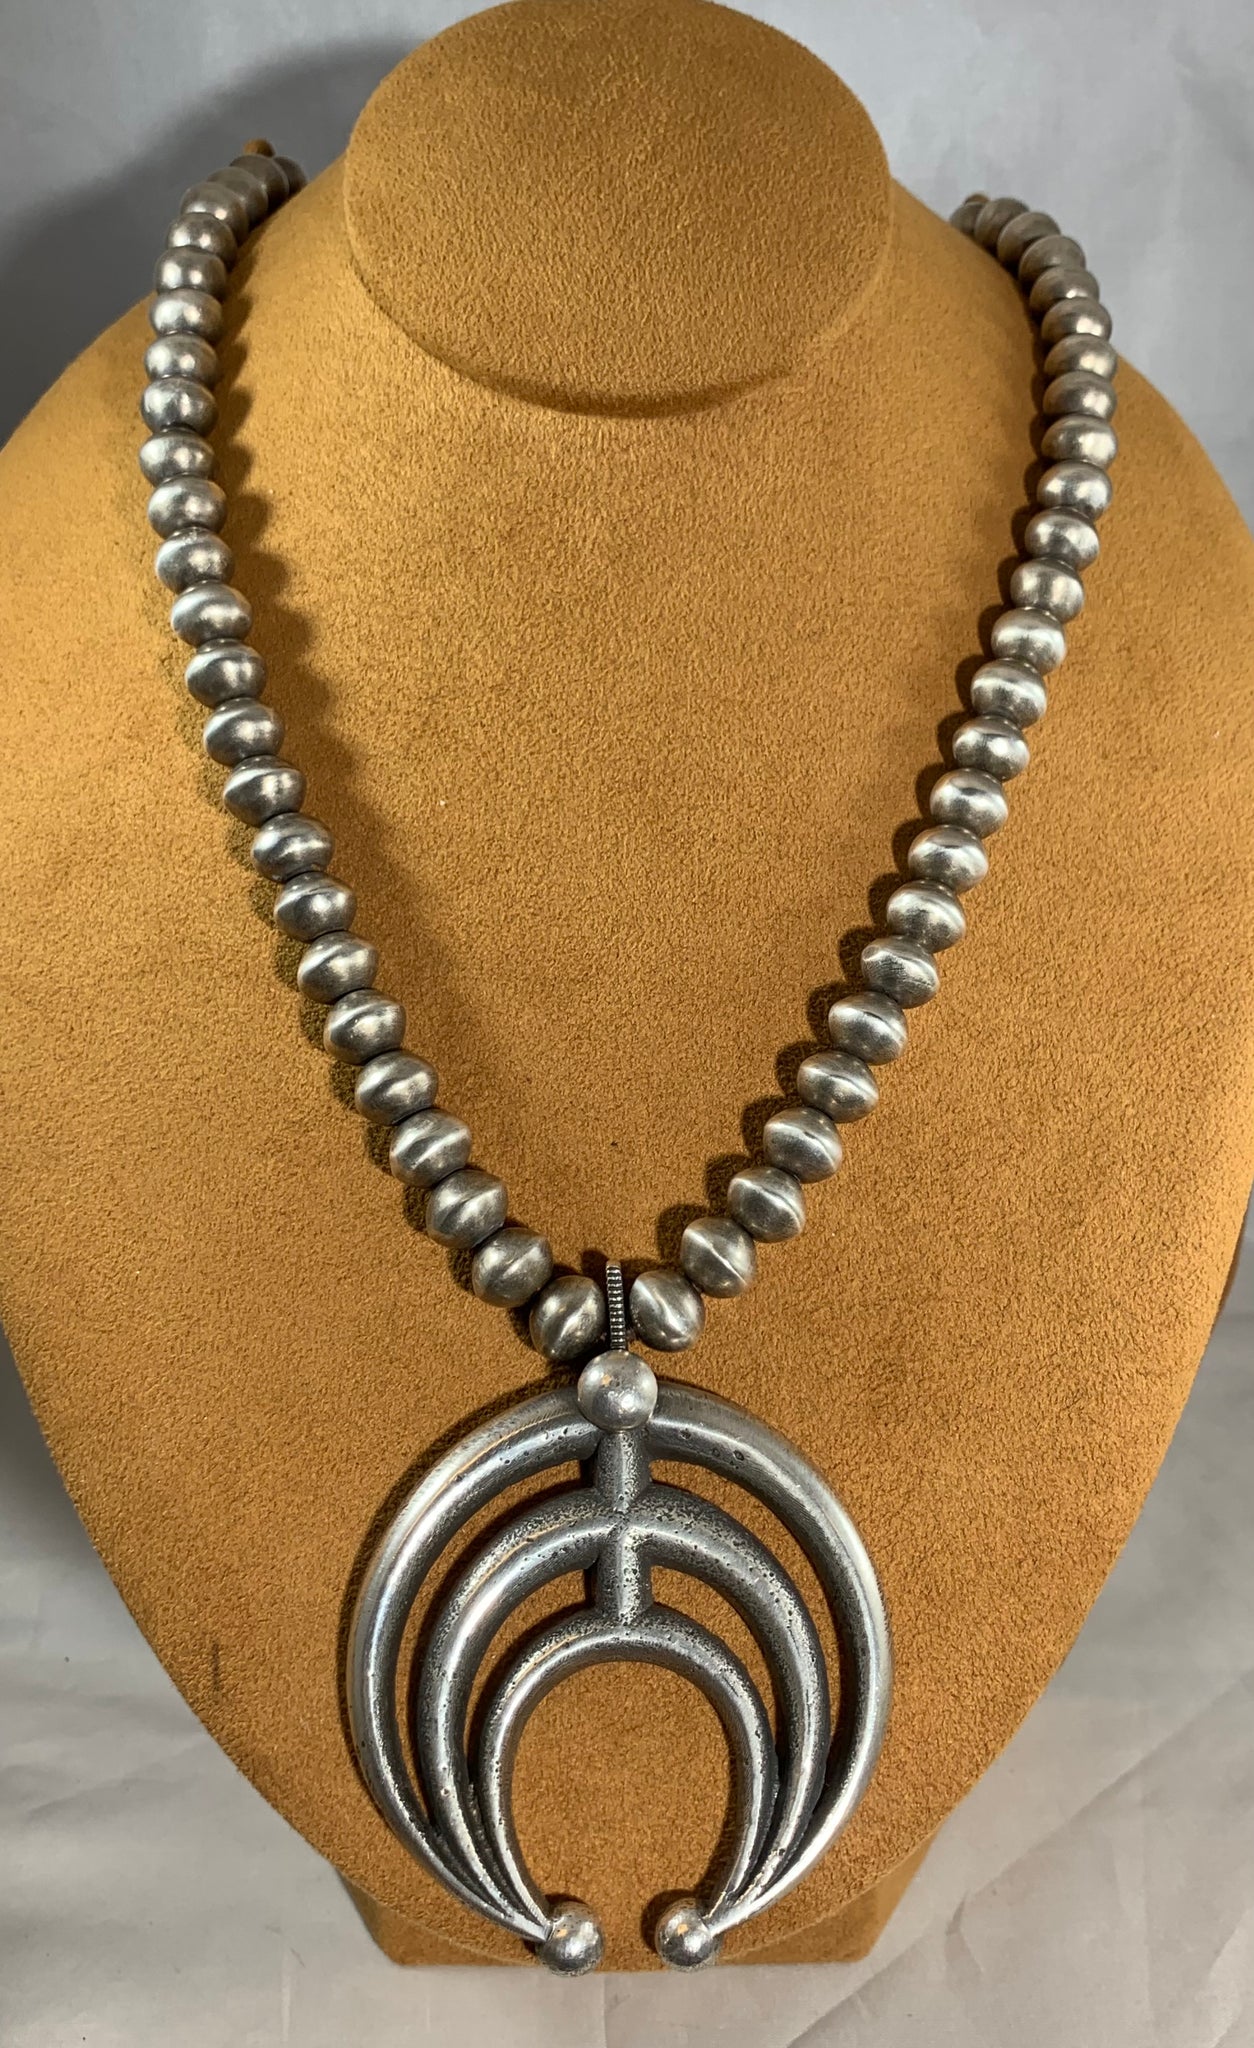 Handmade Sterling Silver Bead Necklace with Triple Naja by Dennis Hogan